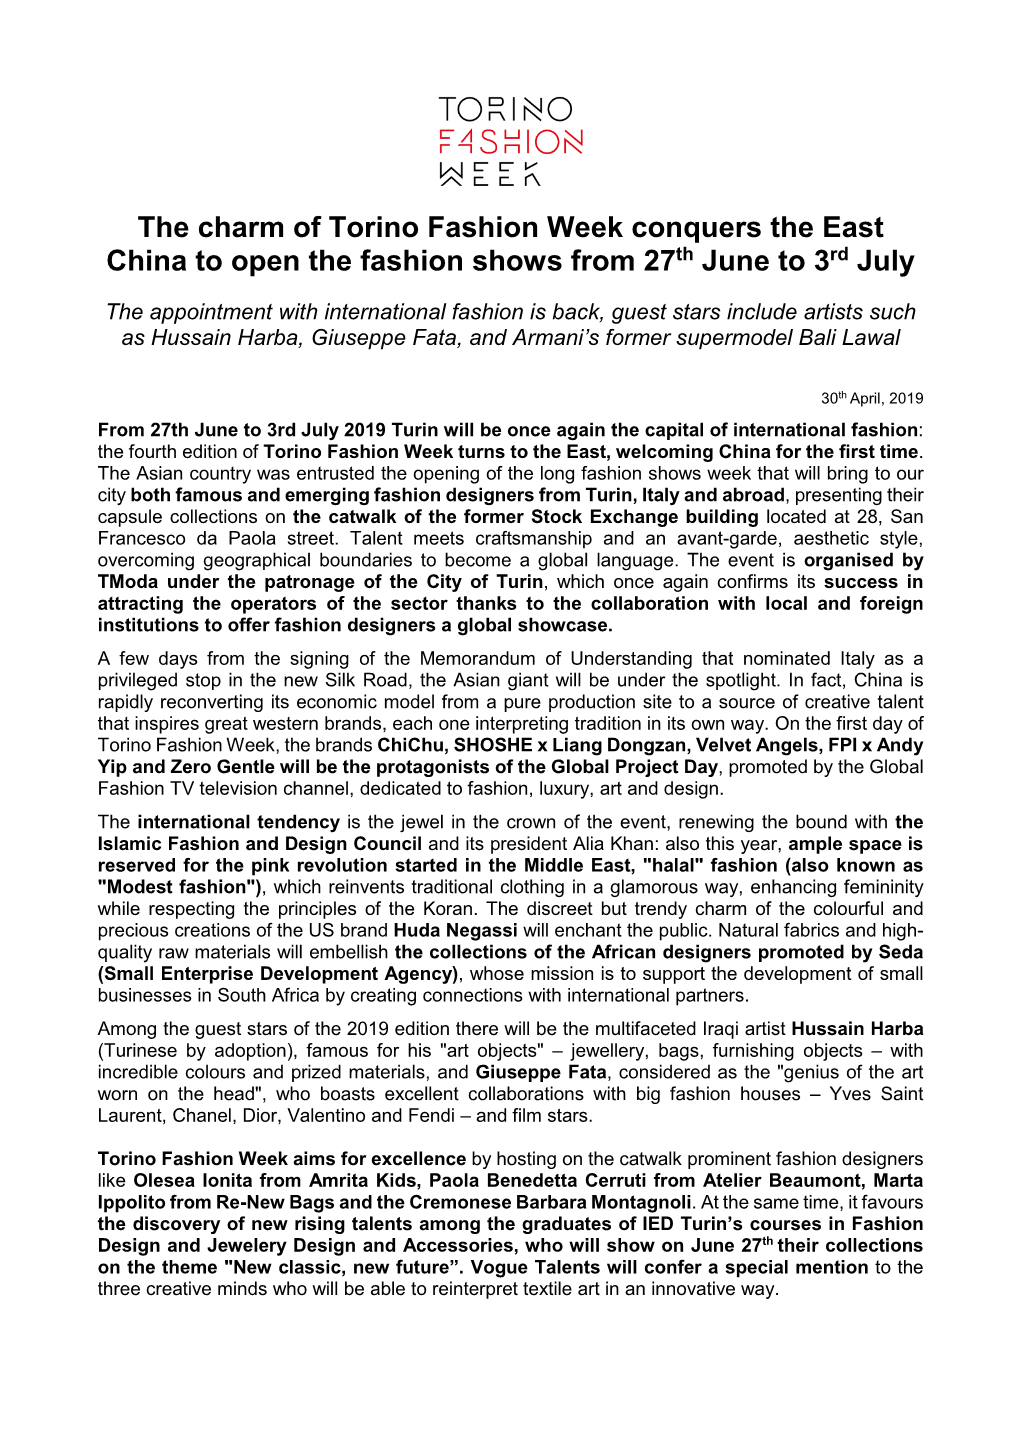 The Charm of Torino Fashion Week Conquers the East China to Open the Fashion Shows from 27Th June to 3Rd July